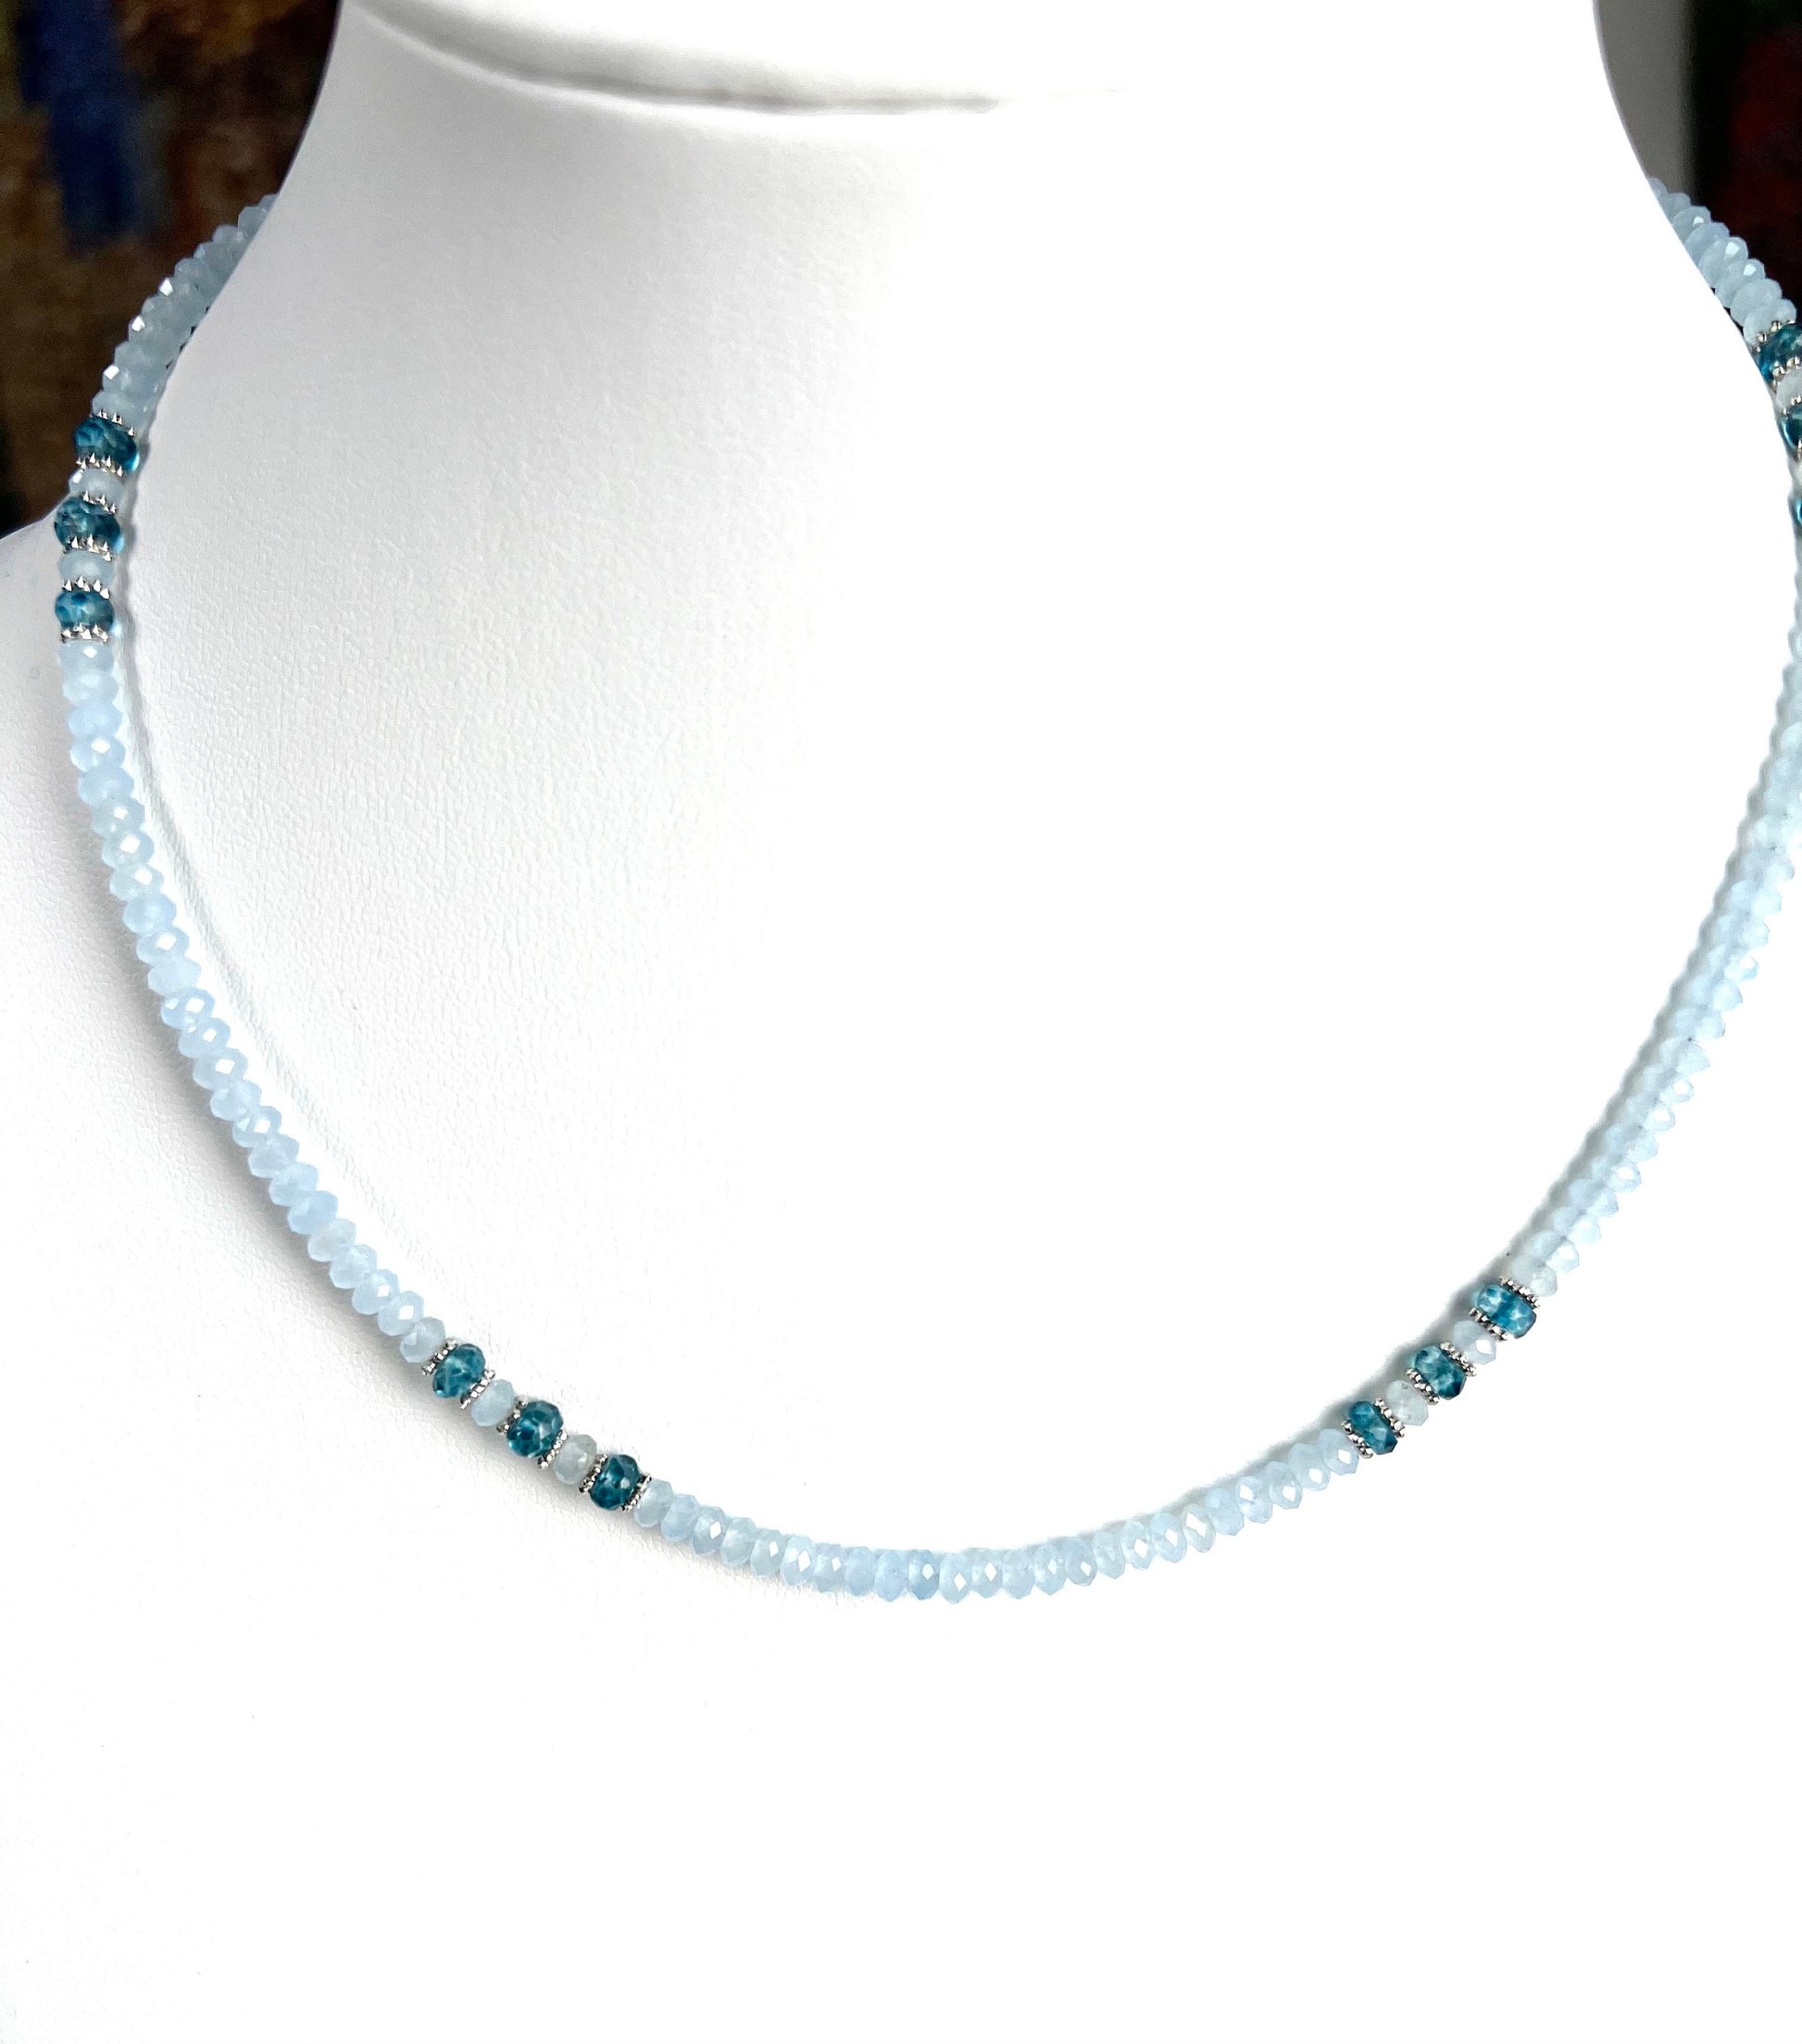 Aquamarine milky micro faceted 4mm German cut spacer London Blue Topaz roundel Bali Daisy 925 Sterling Silver handmade necklace Gift